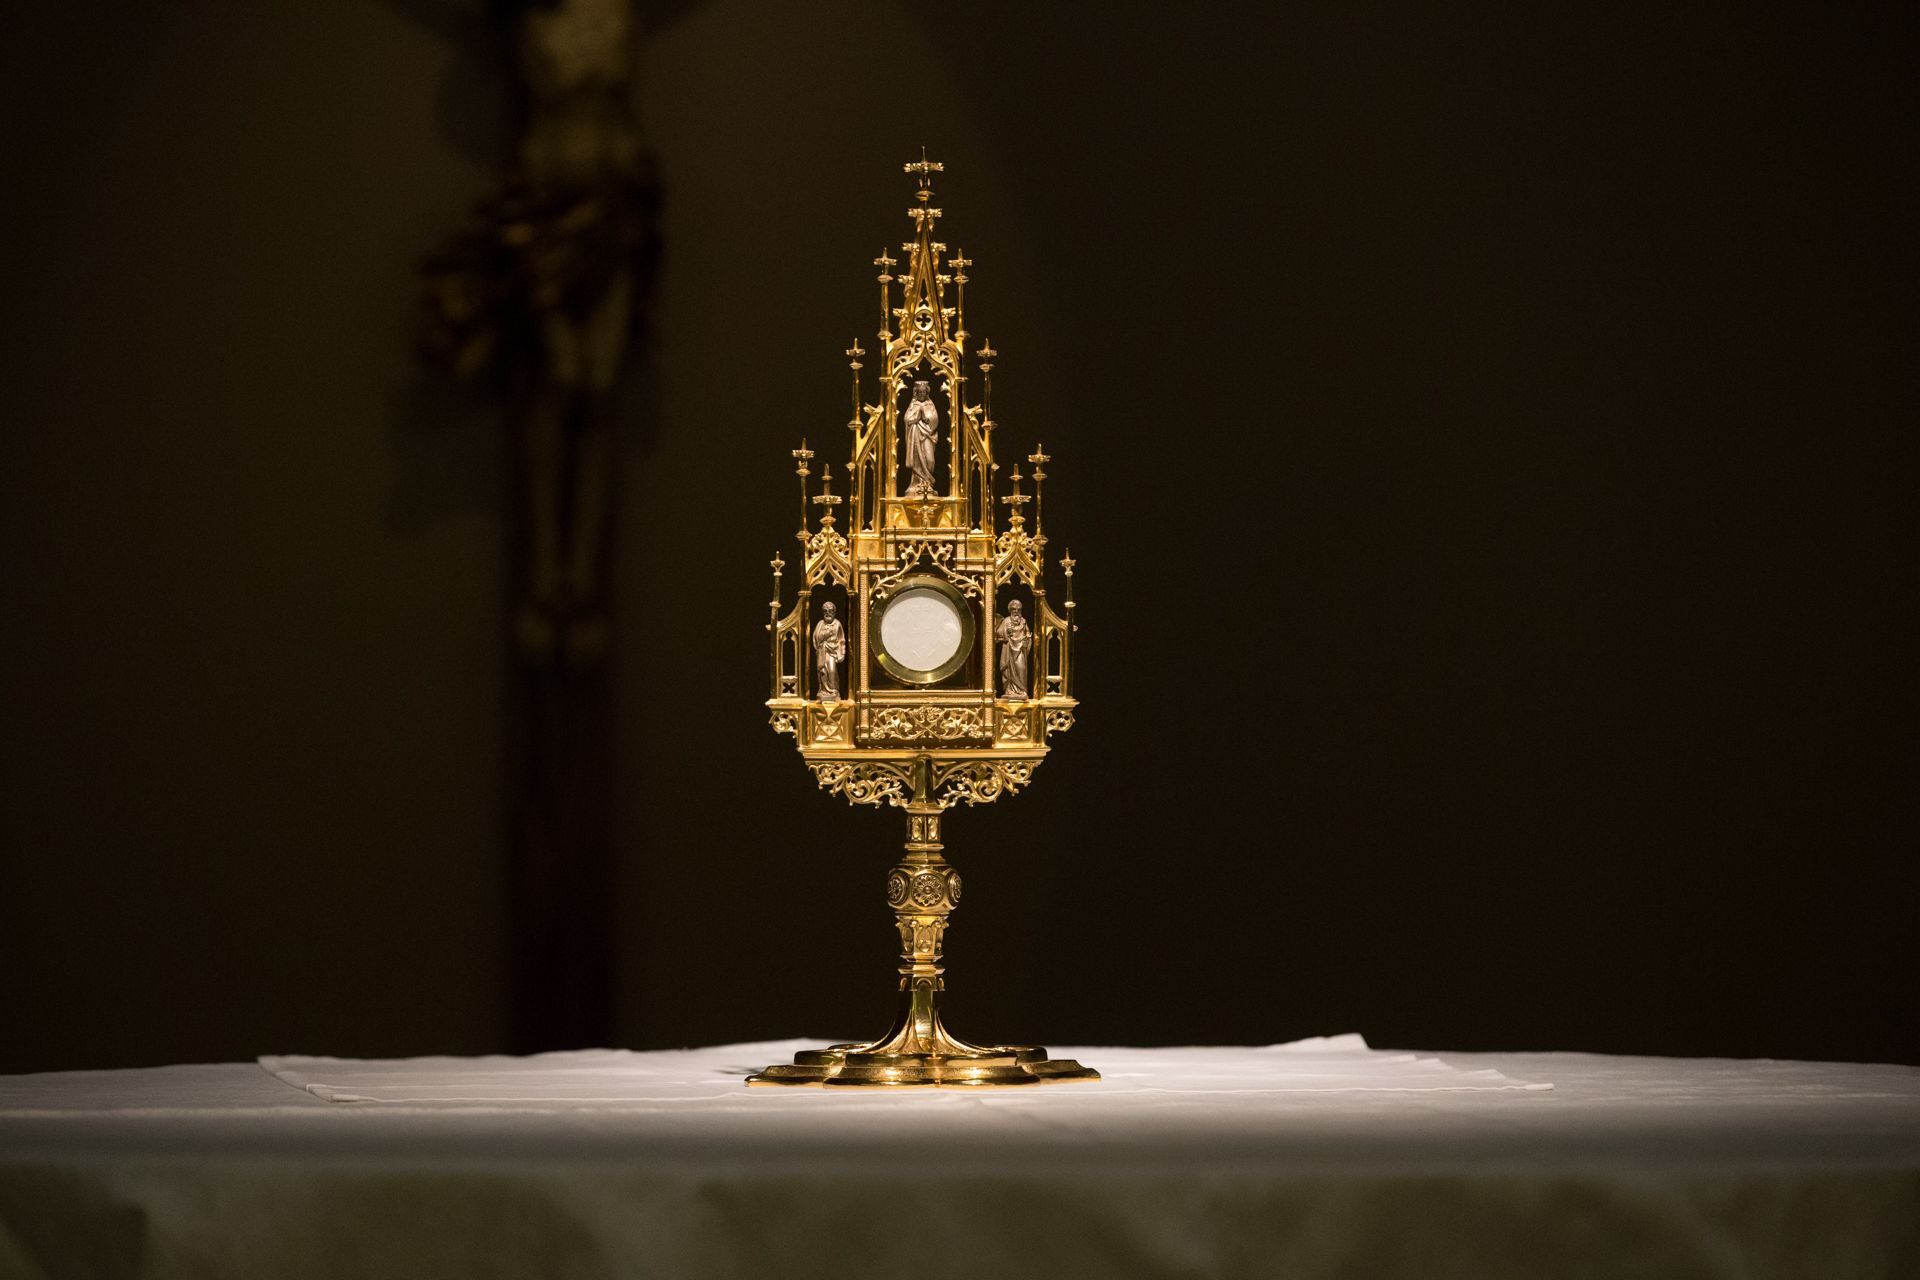 Corpus Christi - Solemnity of the Most Holy Body and Blood of Christ